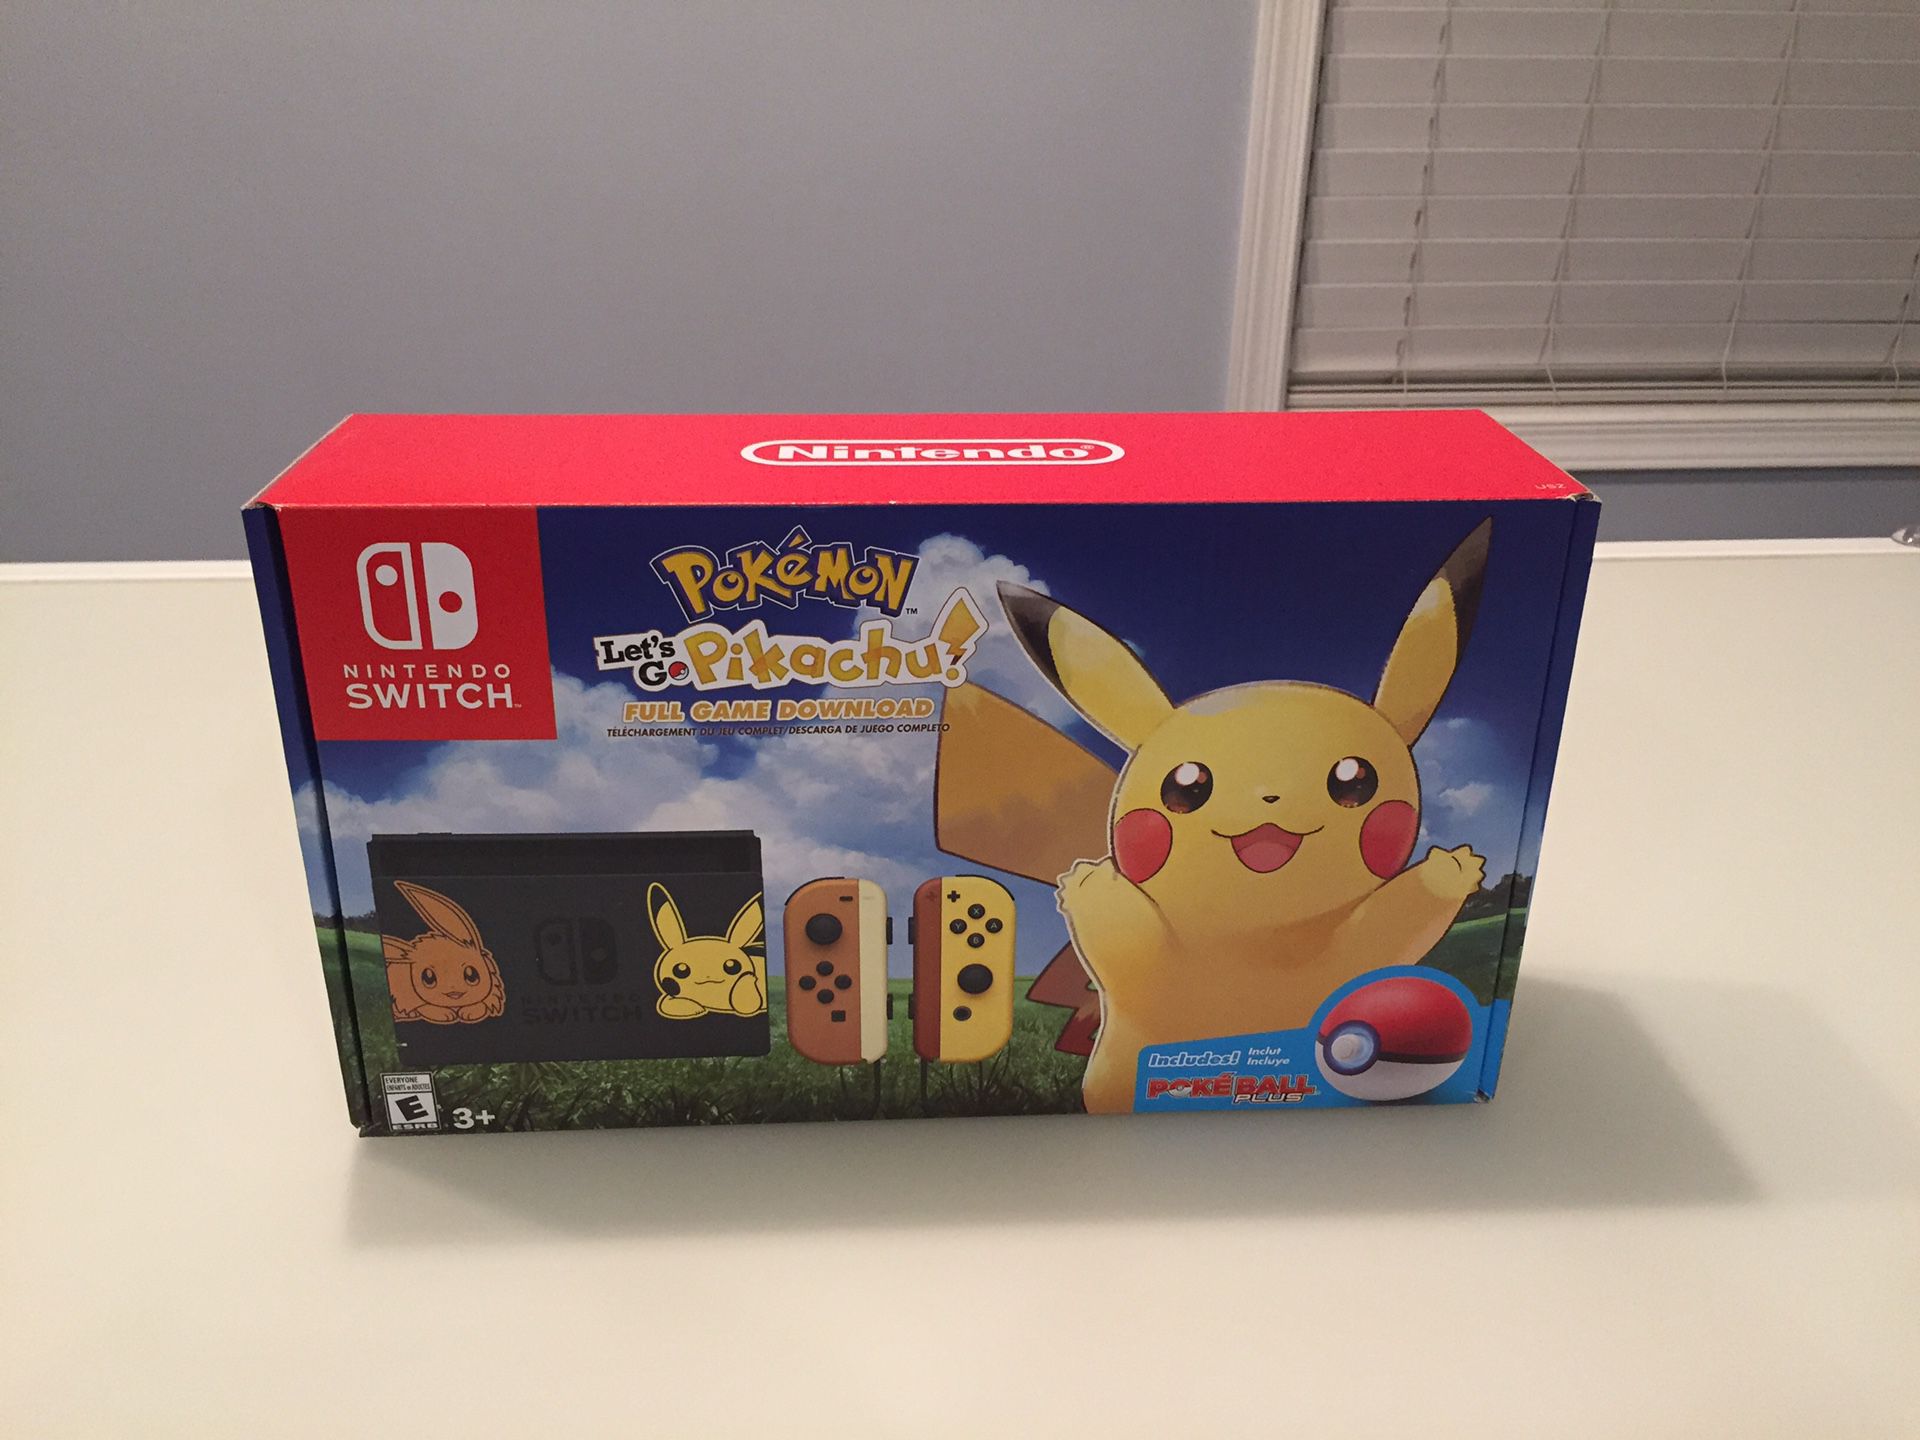 Nintendo Switch Console Bundle - Pikachu and Eevee Edition with Pokemon: Let’s Go, Pikachu! + Poke Ball Plus